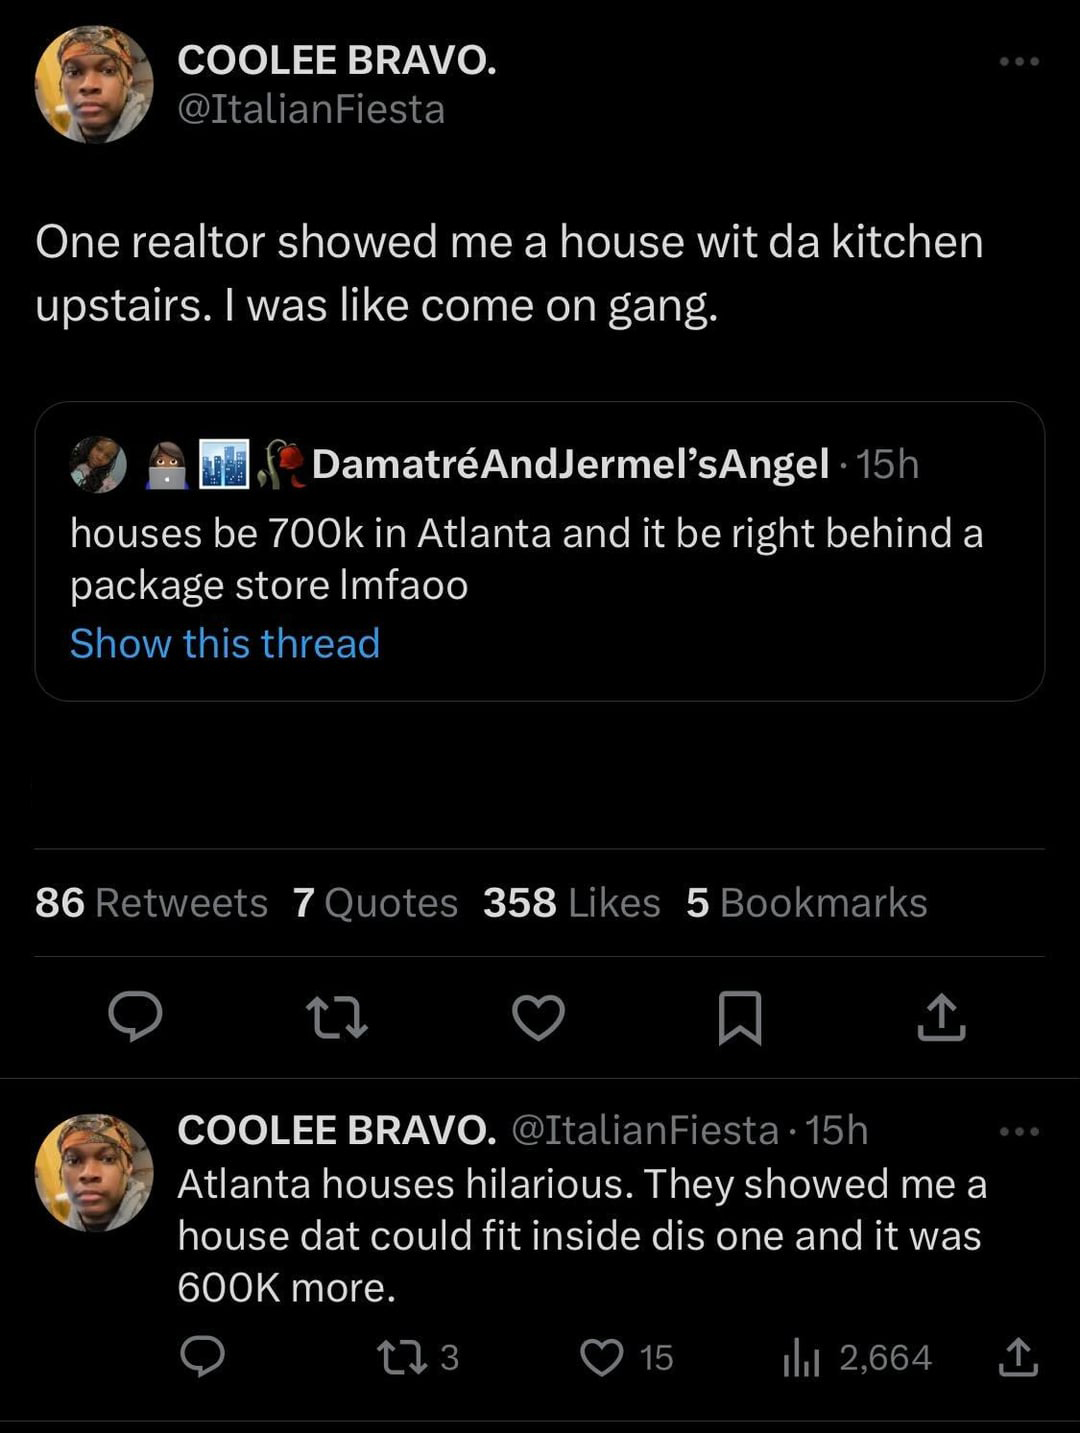 funny tweets - Donald Trump - Coolee Bravo. Fiesta One realtor showed me a house wit da kitchen upstairs. I was come on gang. DamatrAndJermel's Angel15h houses be in Atlanta and it be right behind a package store Imfaoo Show this thread 86 7 Quotes 358 5 